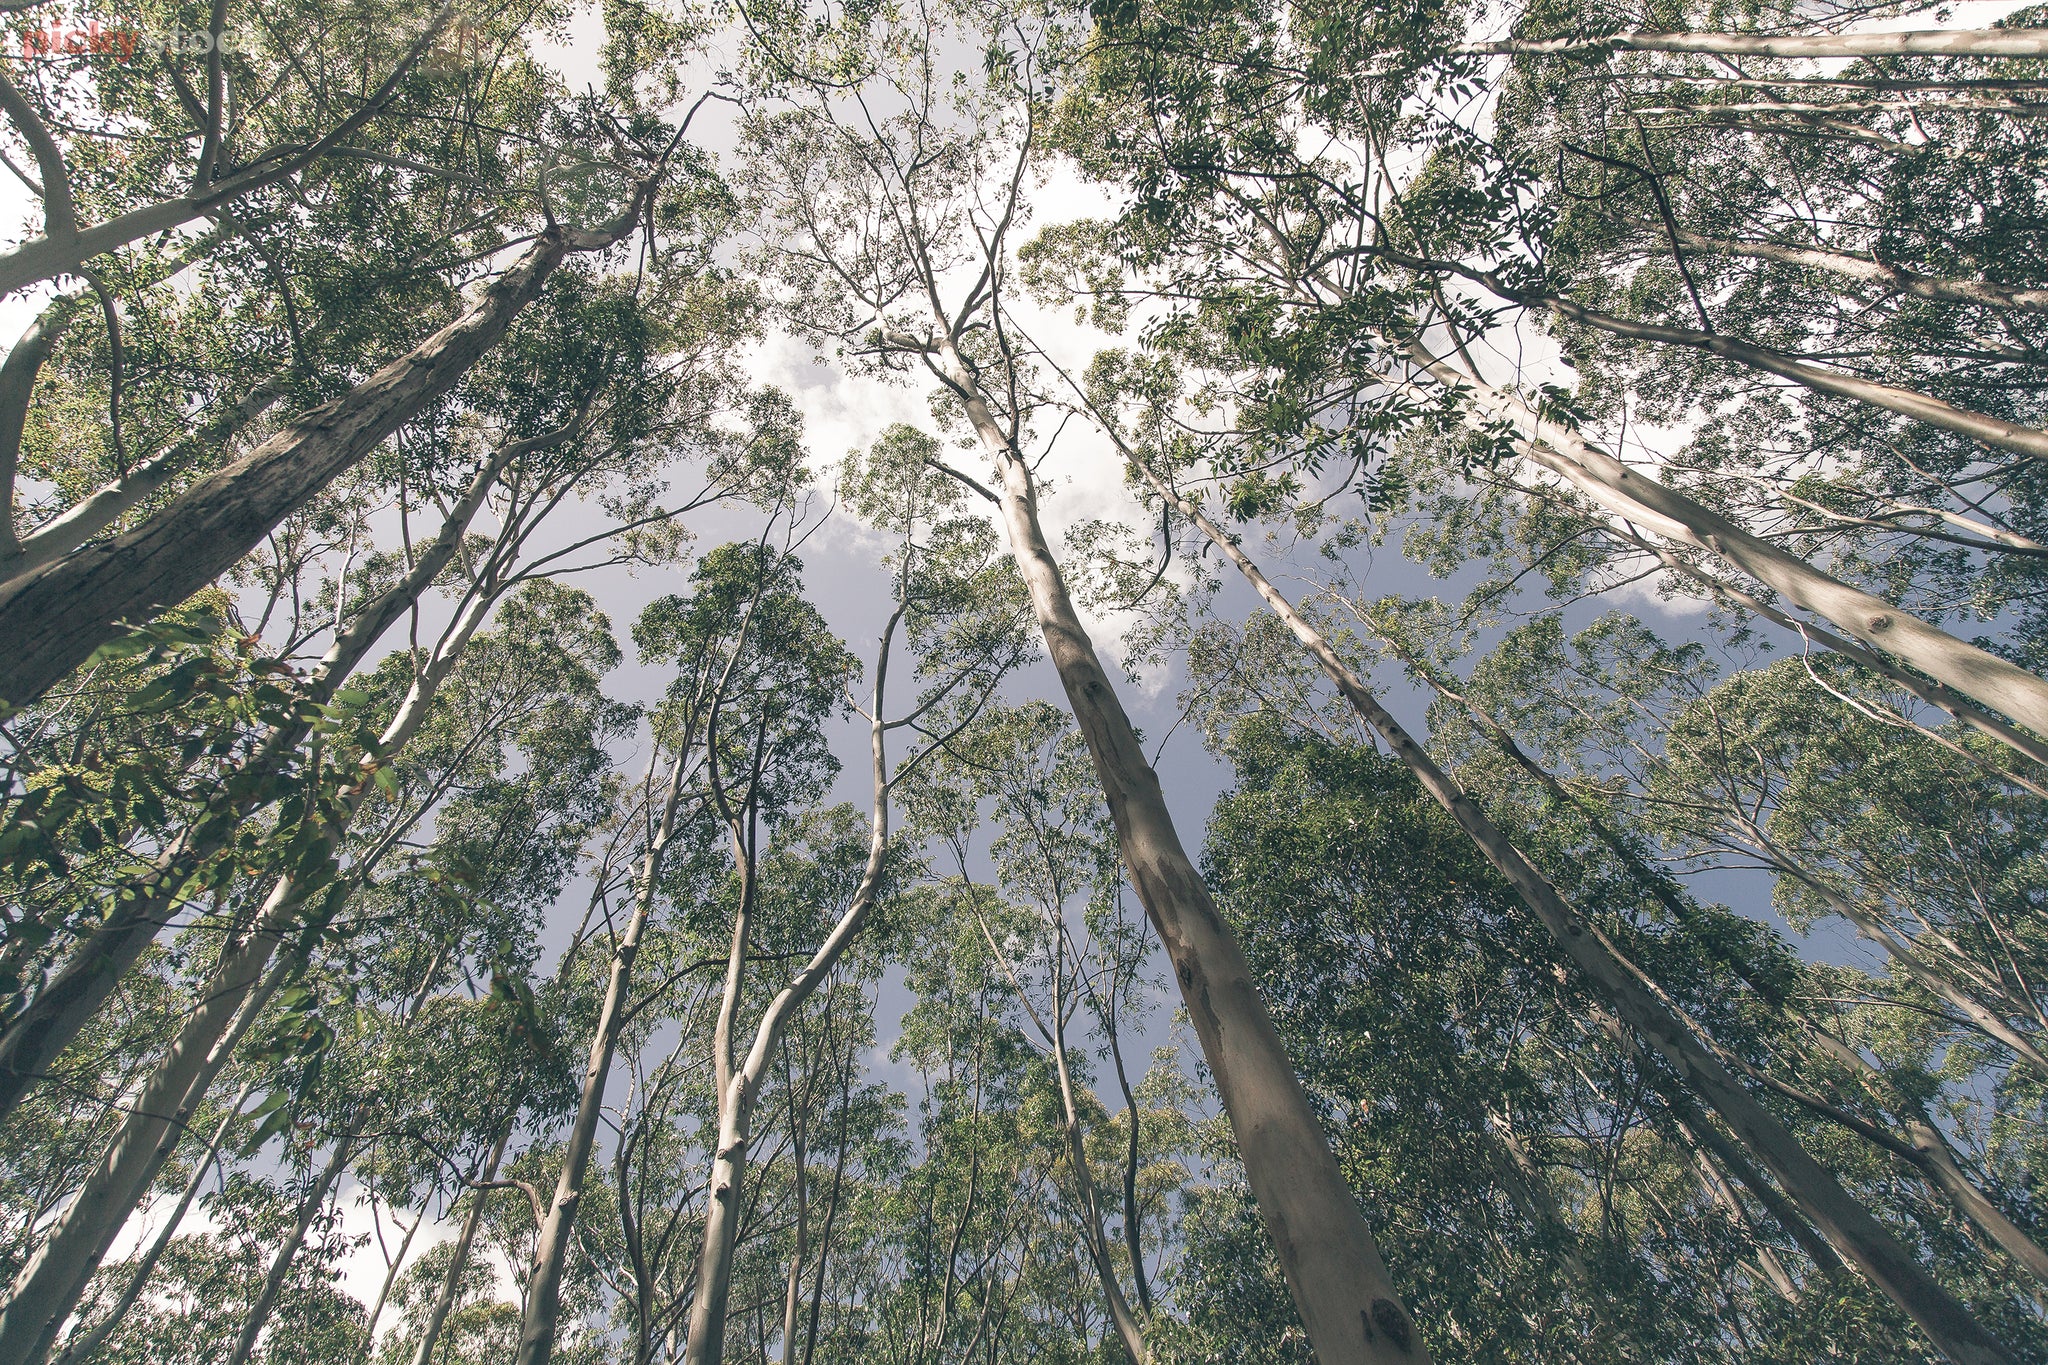 Landscape close up closely packed eucalyptus trees reaching to the sky like thin white hands.